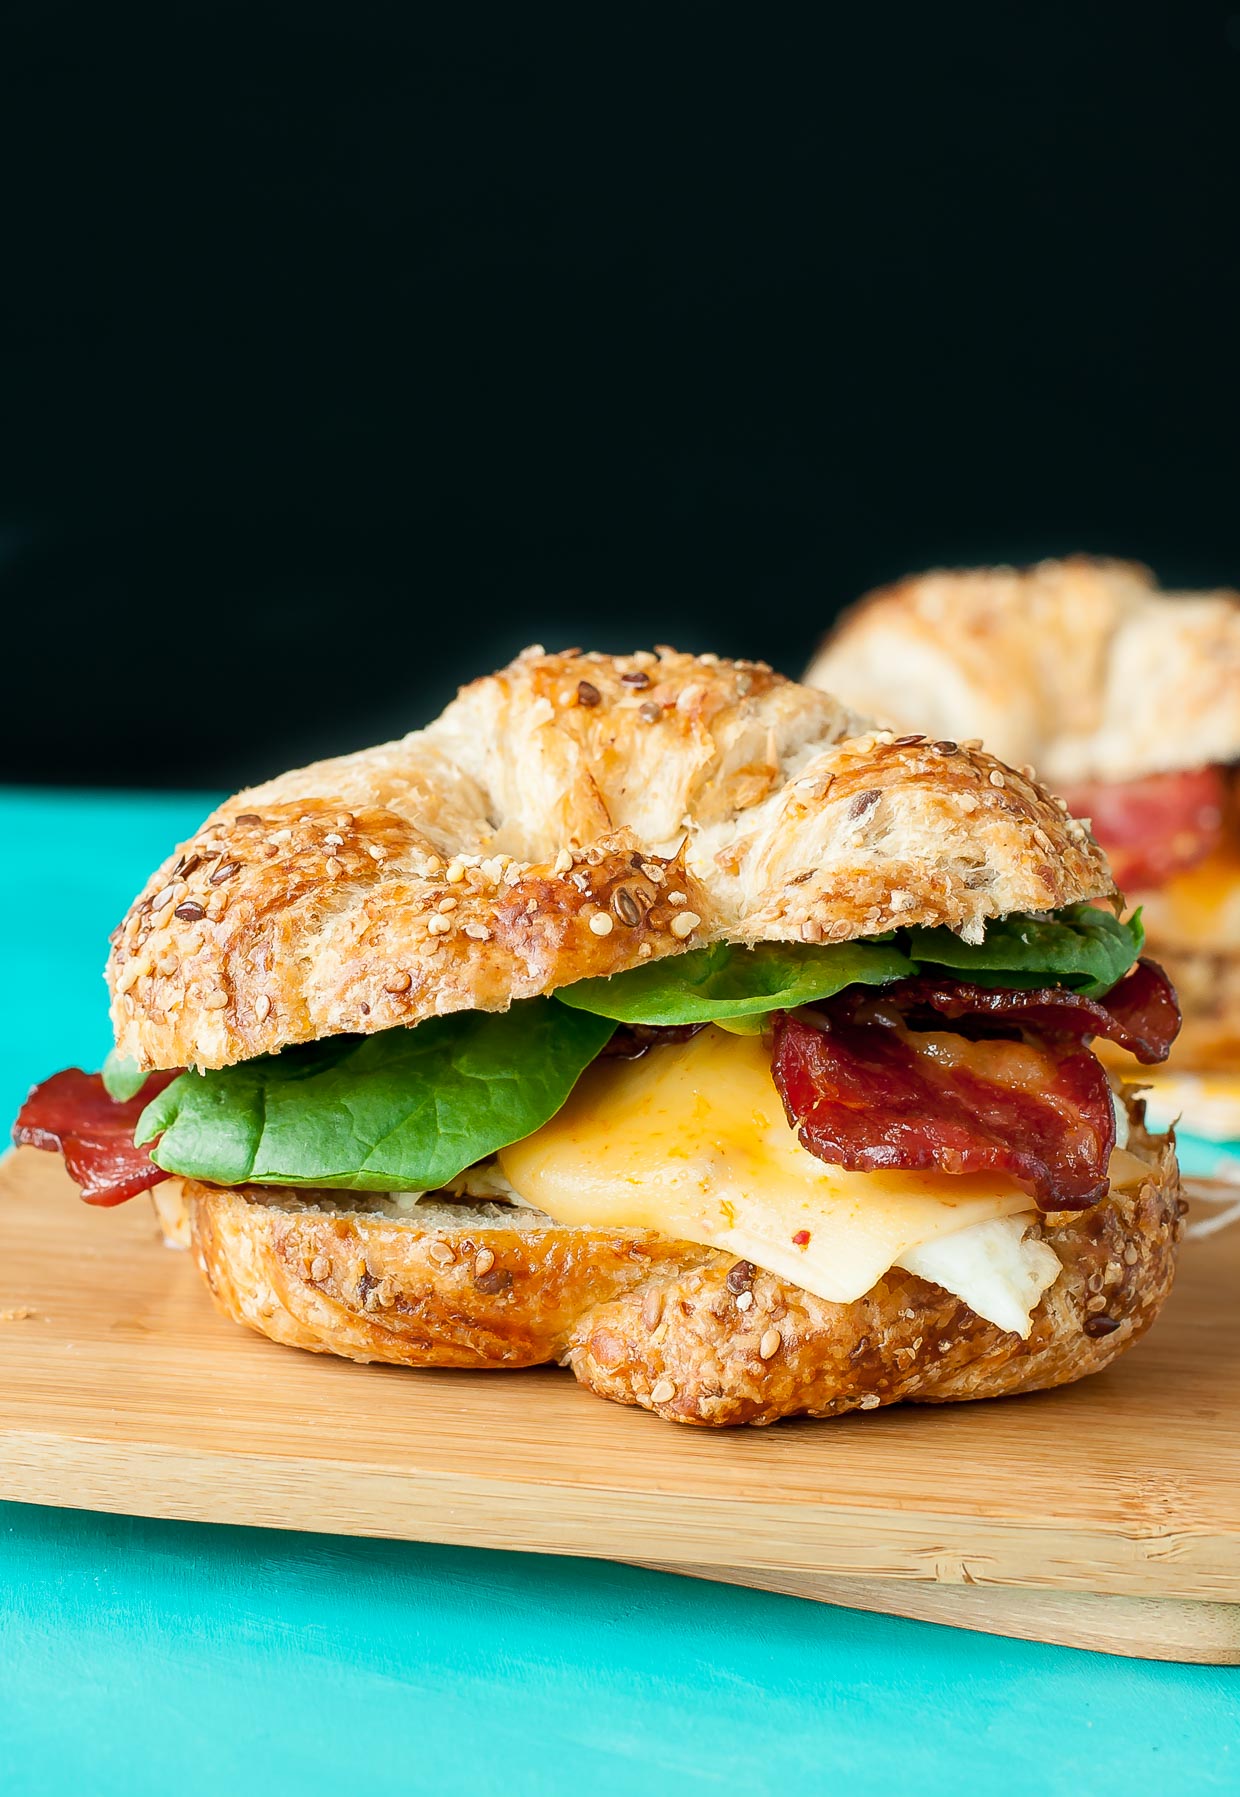 Croissant breakfast sandwich with egg, lettuce and bacon placed on a wooden chopping board.